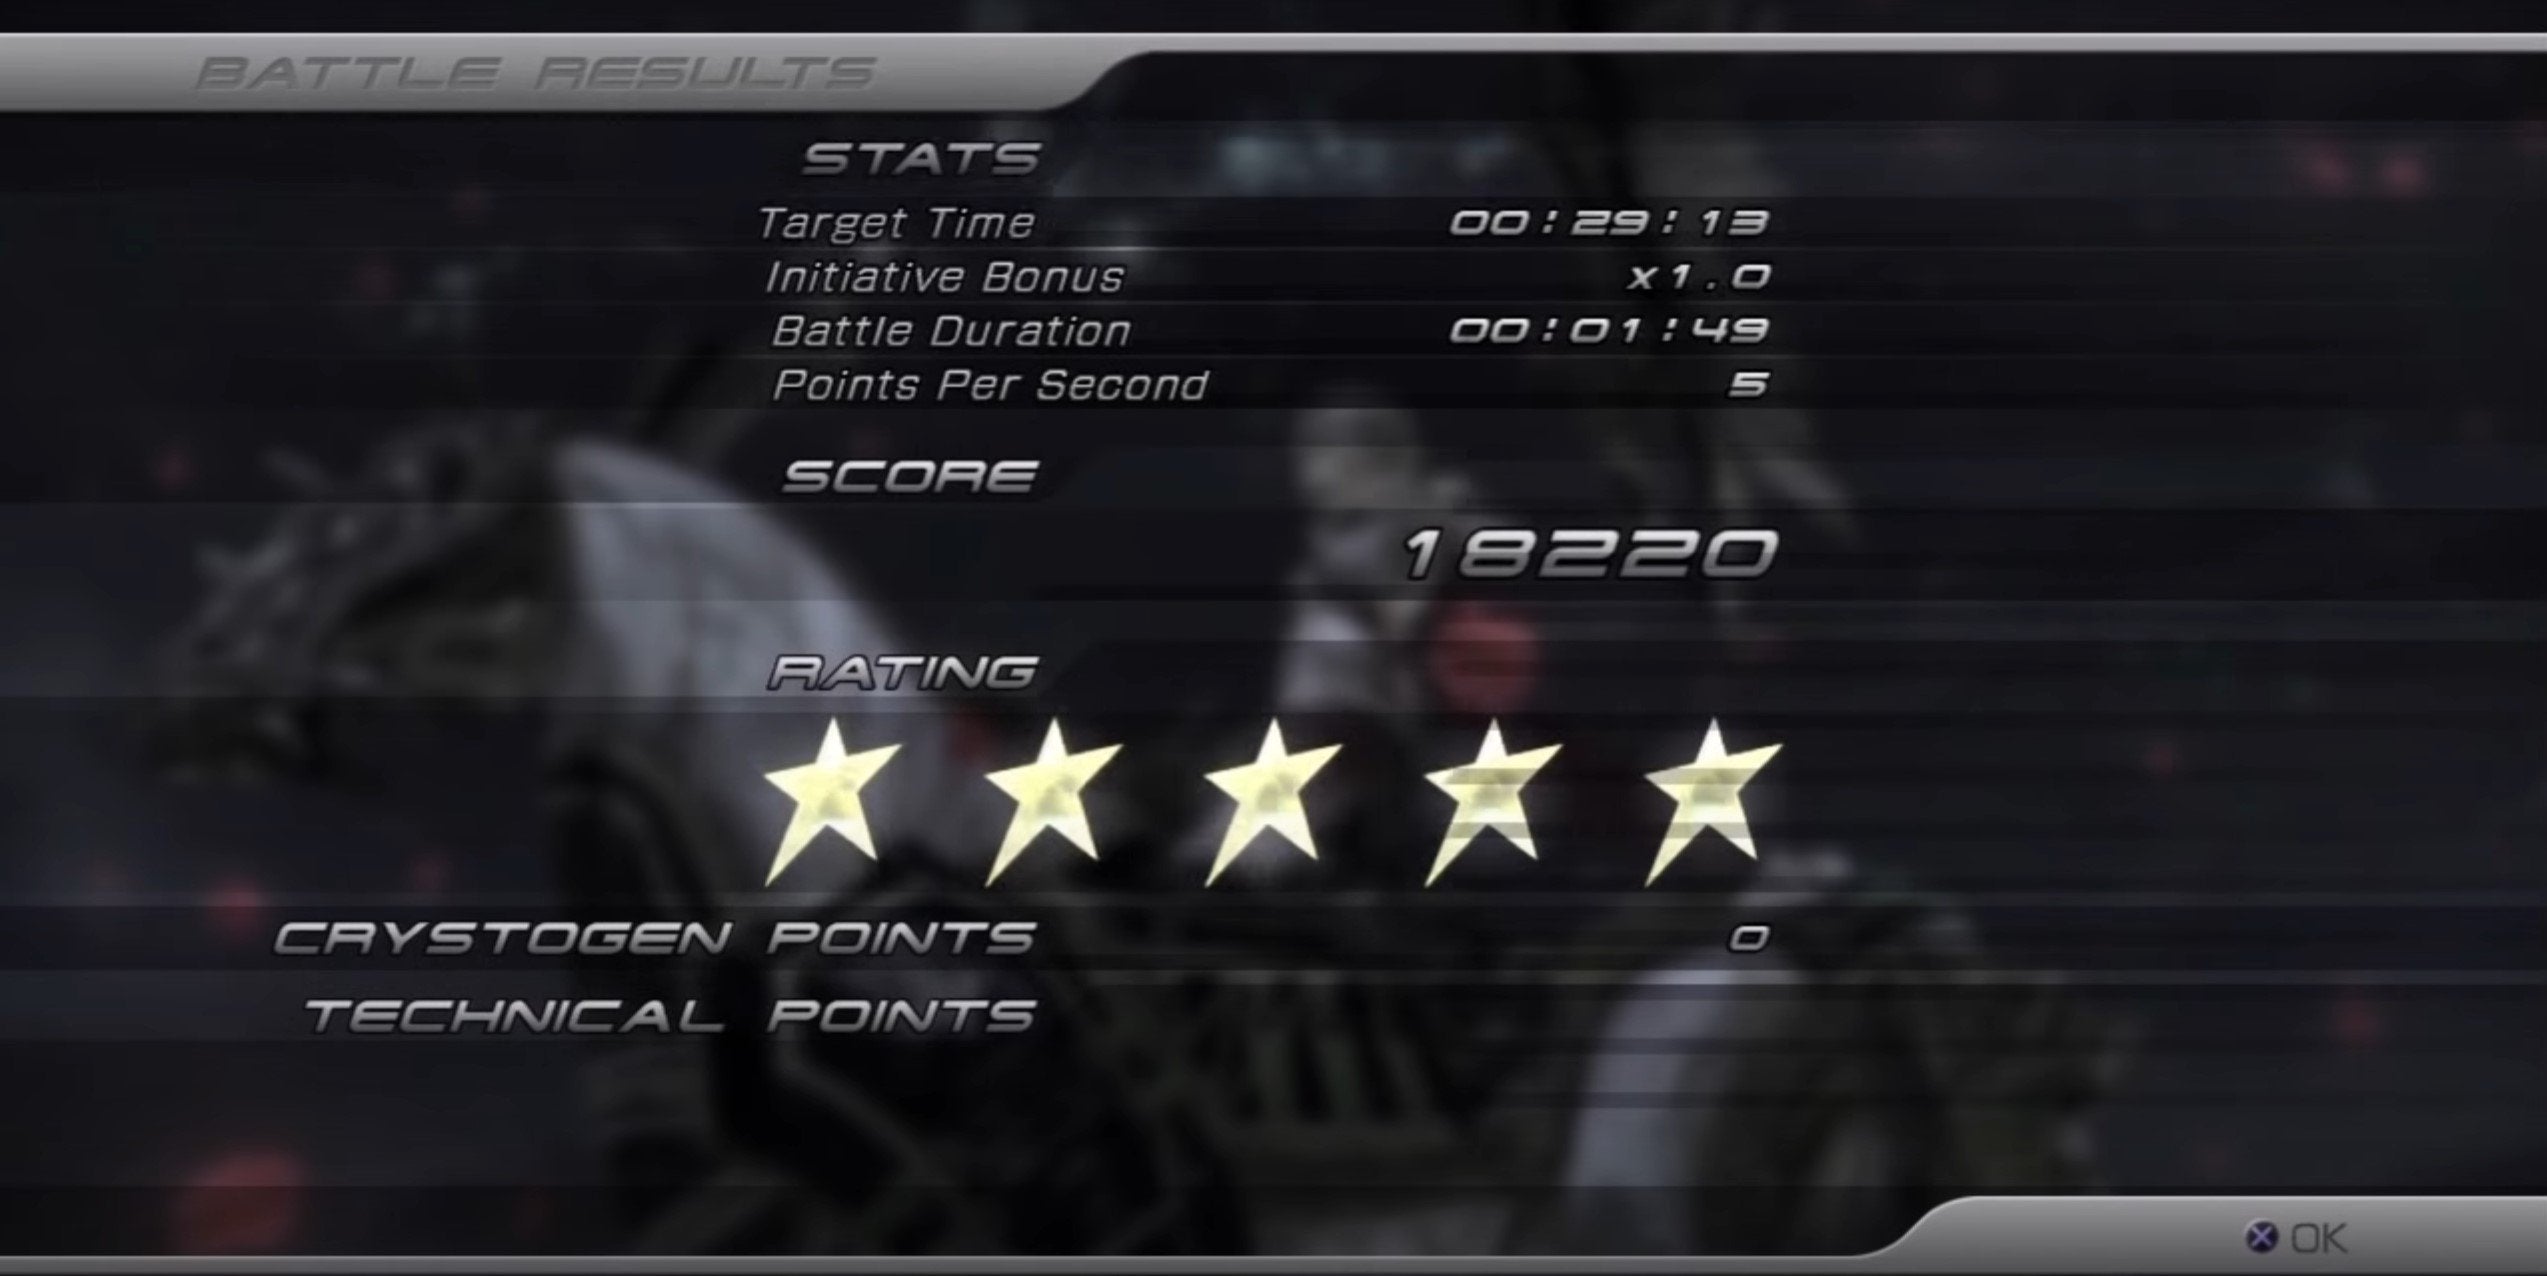 A 5-star battle result screen from Final Fantasy XIII. 